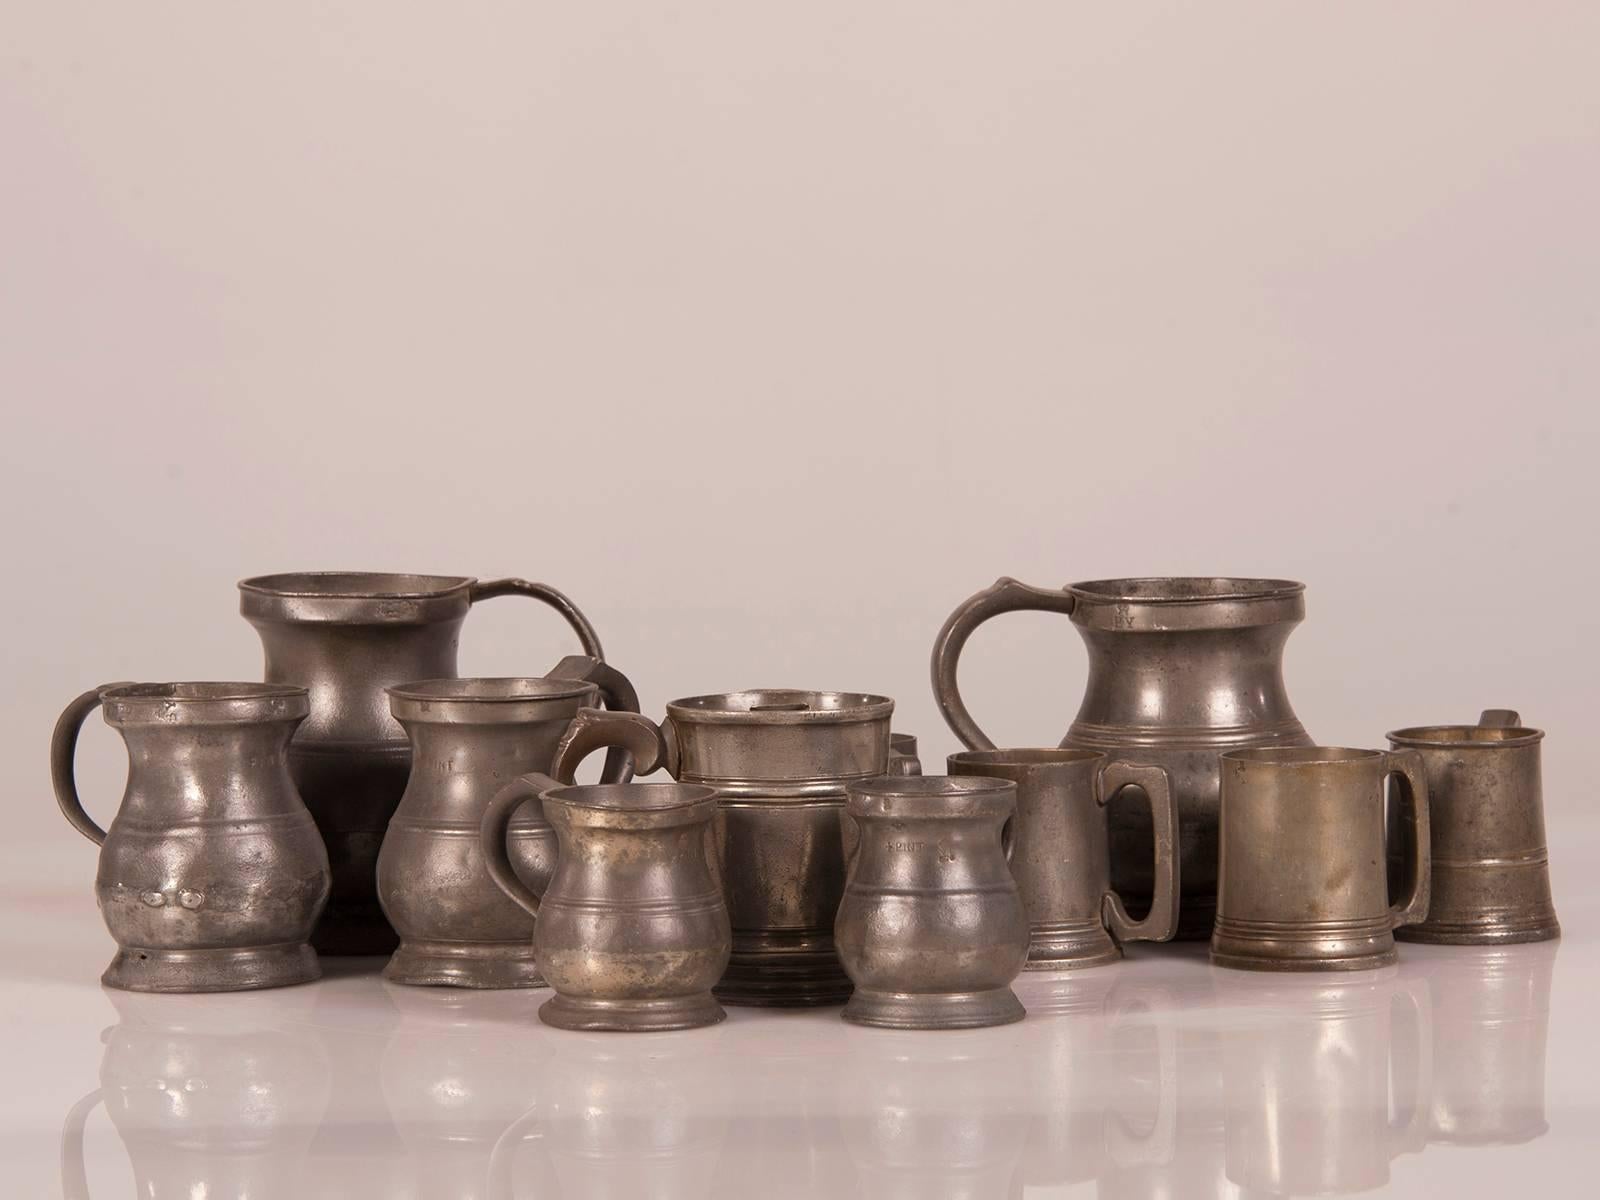 Tudor Set Antique English Pewter Cups and Pitchers, circa 1850 For Sale